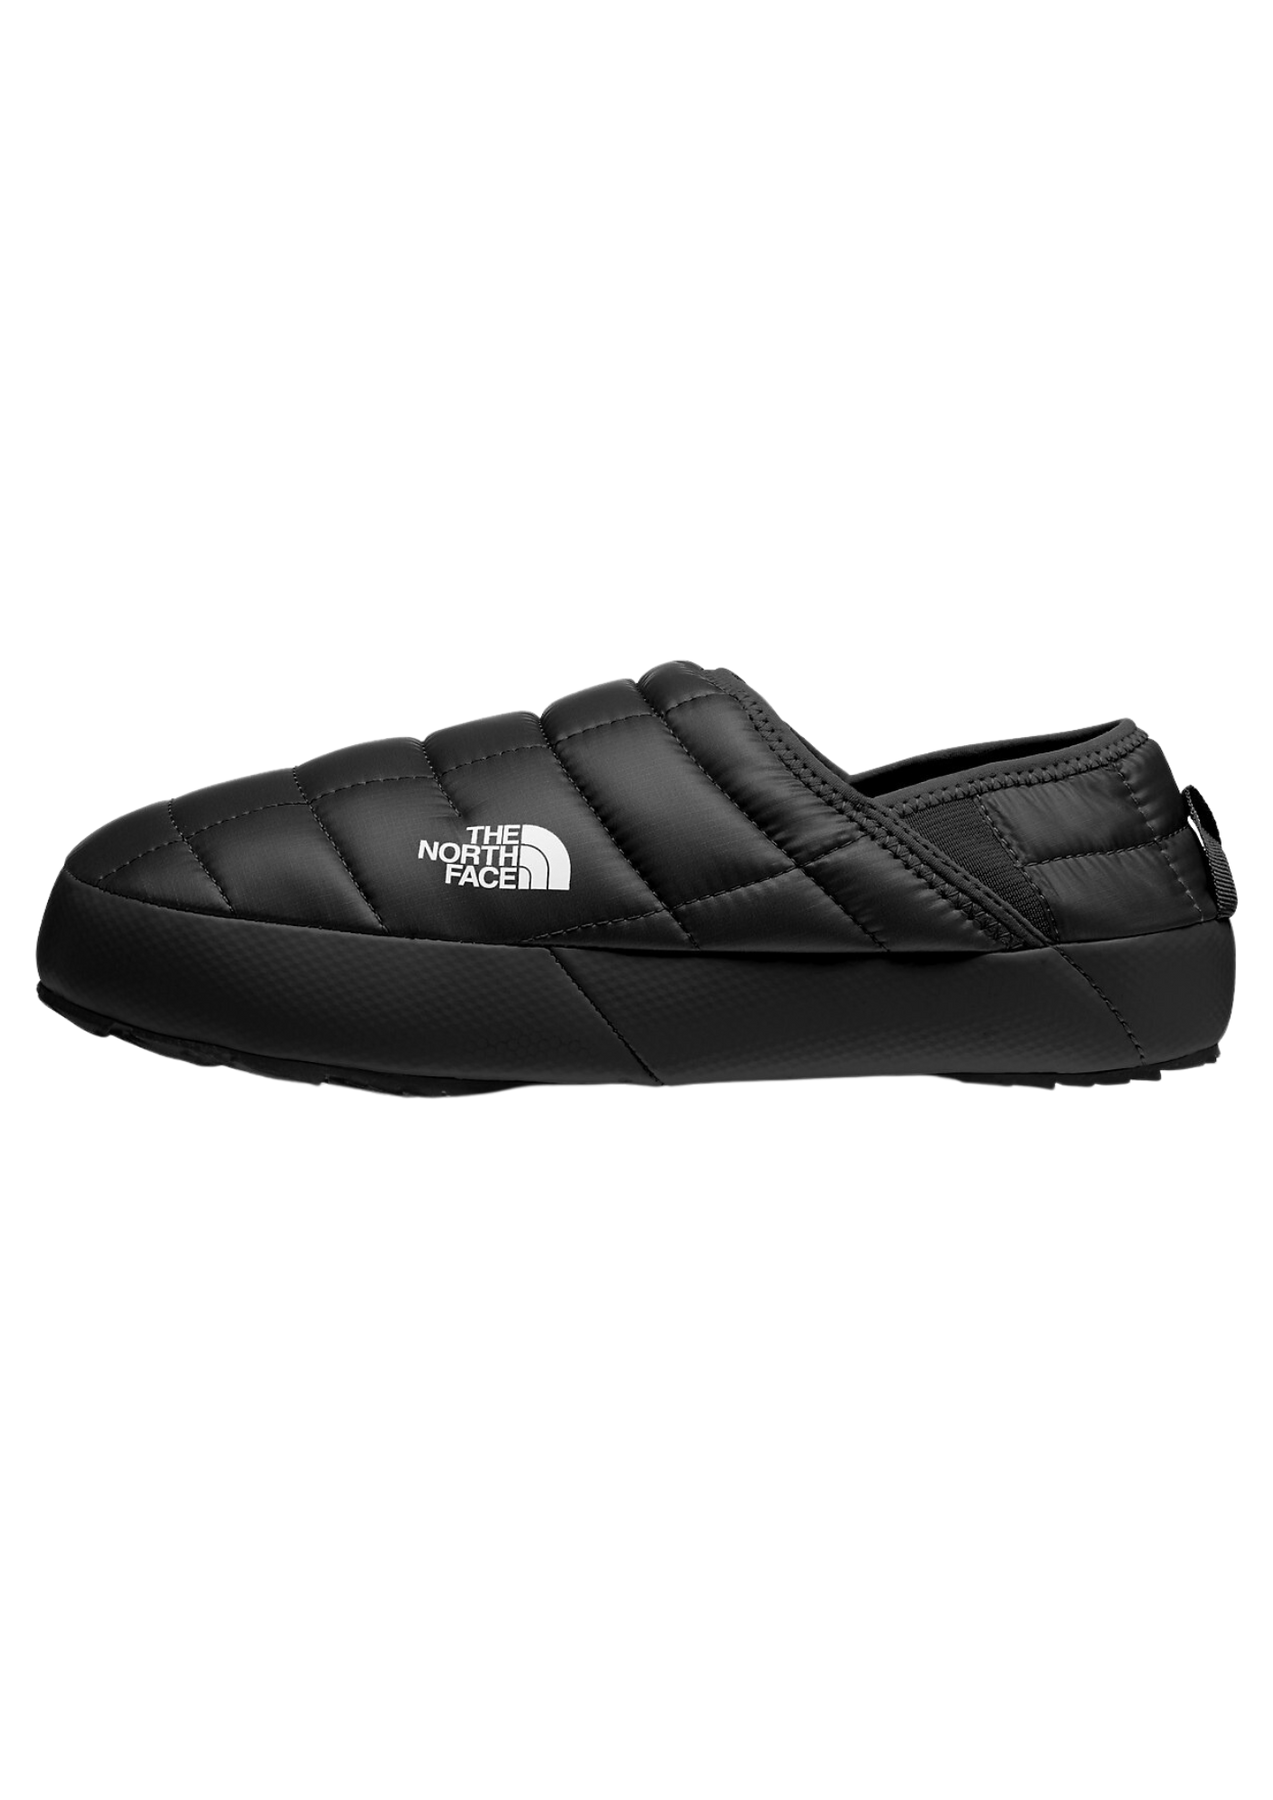 W Thermoball Traction Mule V - Black/Black